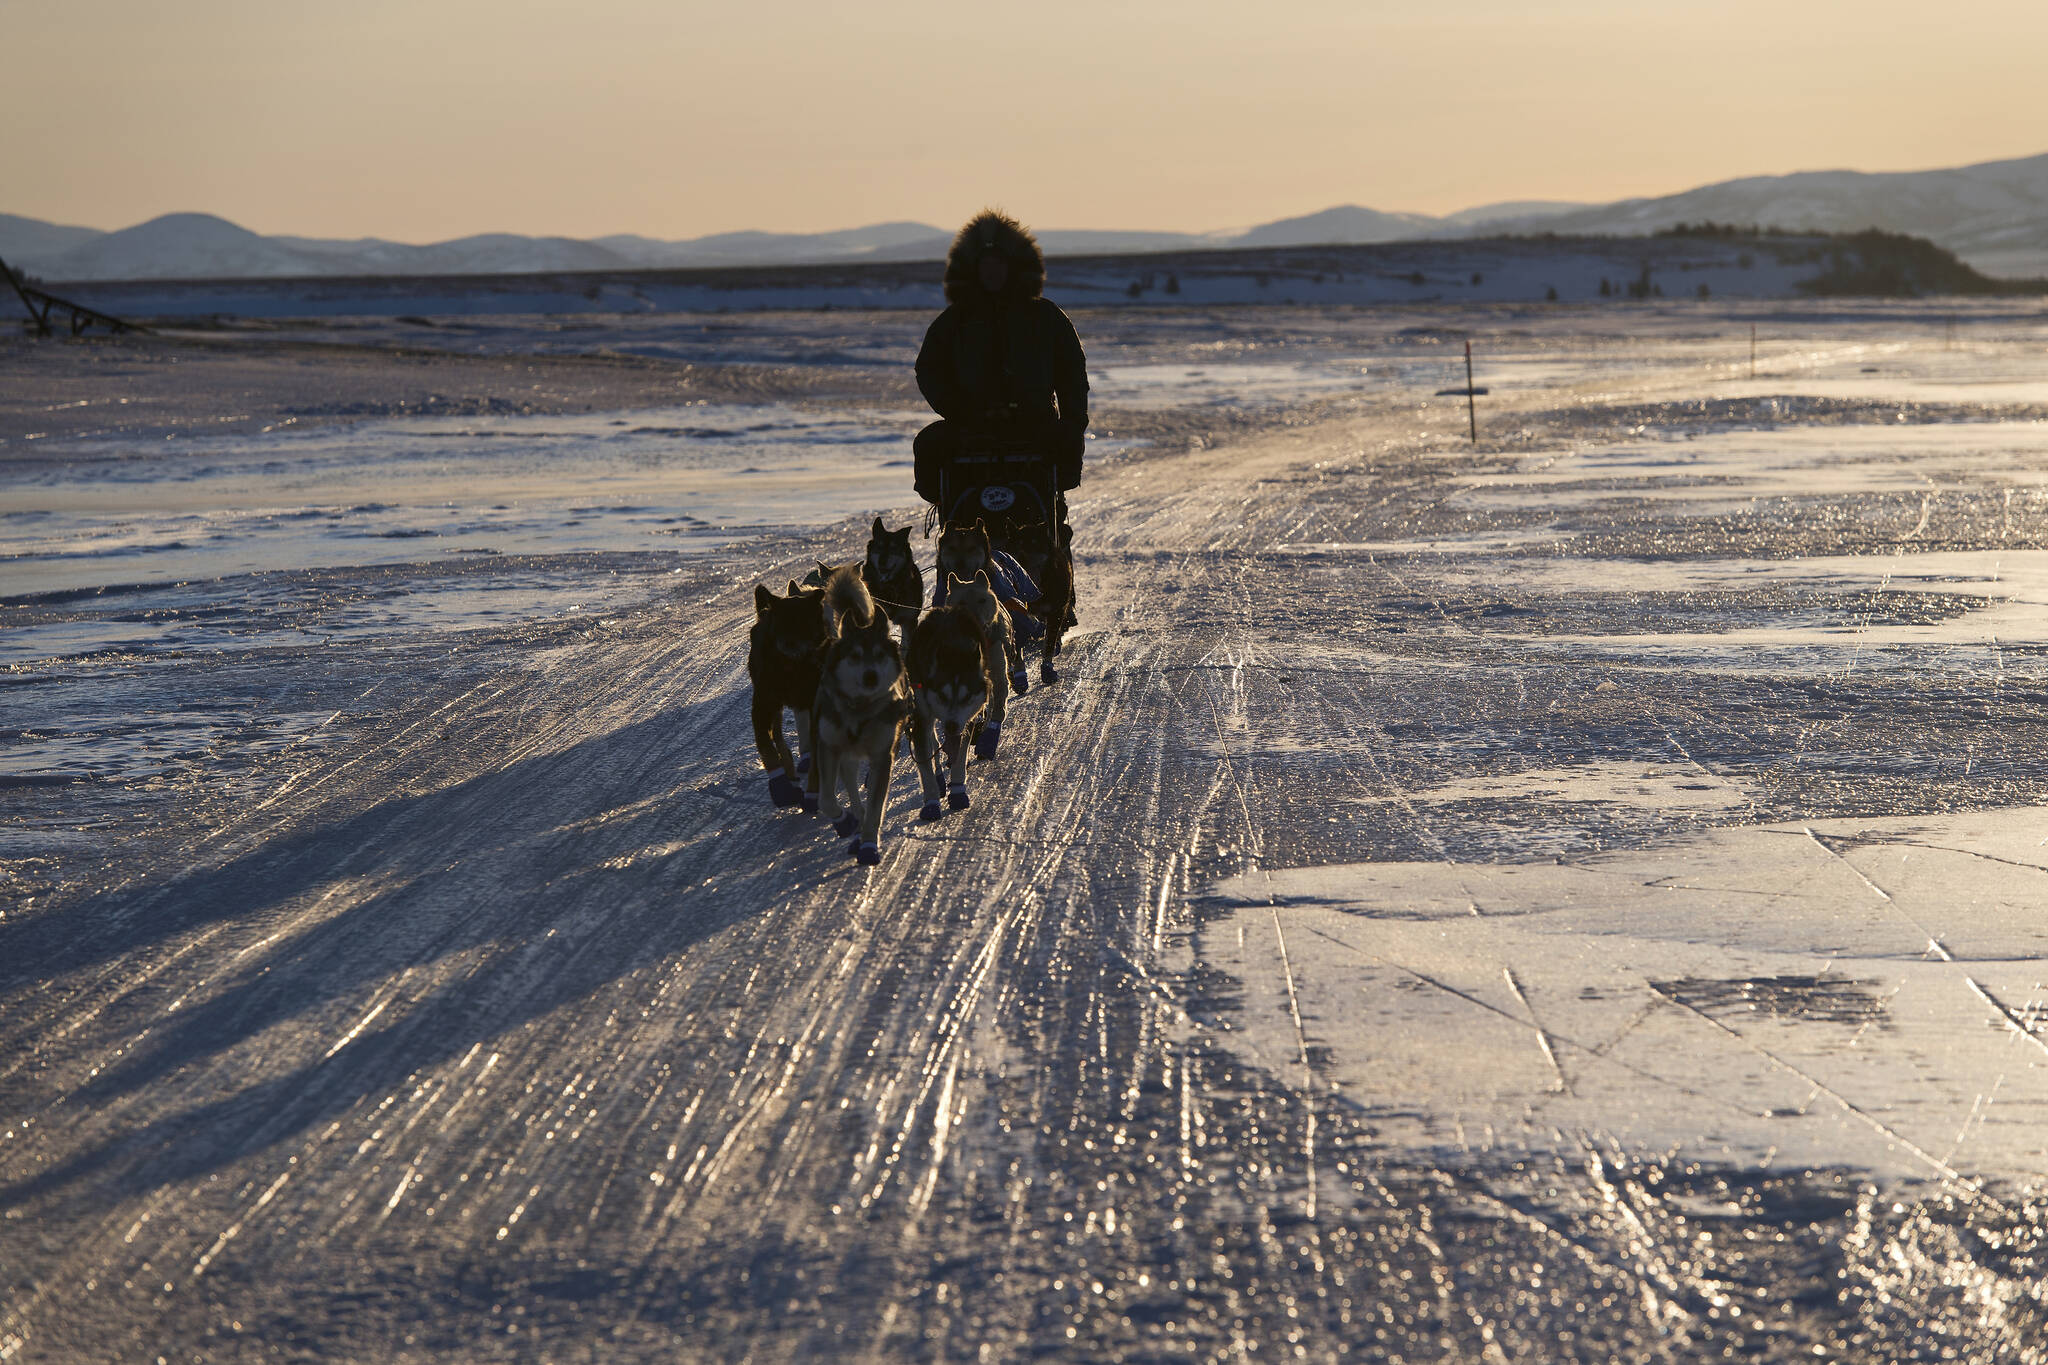 Veteran musher Aaron Burmeister rides on a mostly bare-ice stretch of trail during the Iditarod Trail Sled Dog Race, as he reaches Unalakleet, Alaska on Sunday, March 13, 2022. (Marc Lester/Anchorage Daily News via AP)